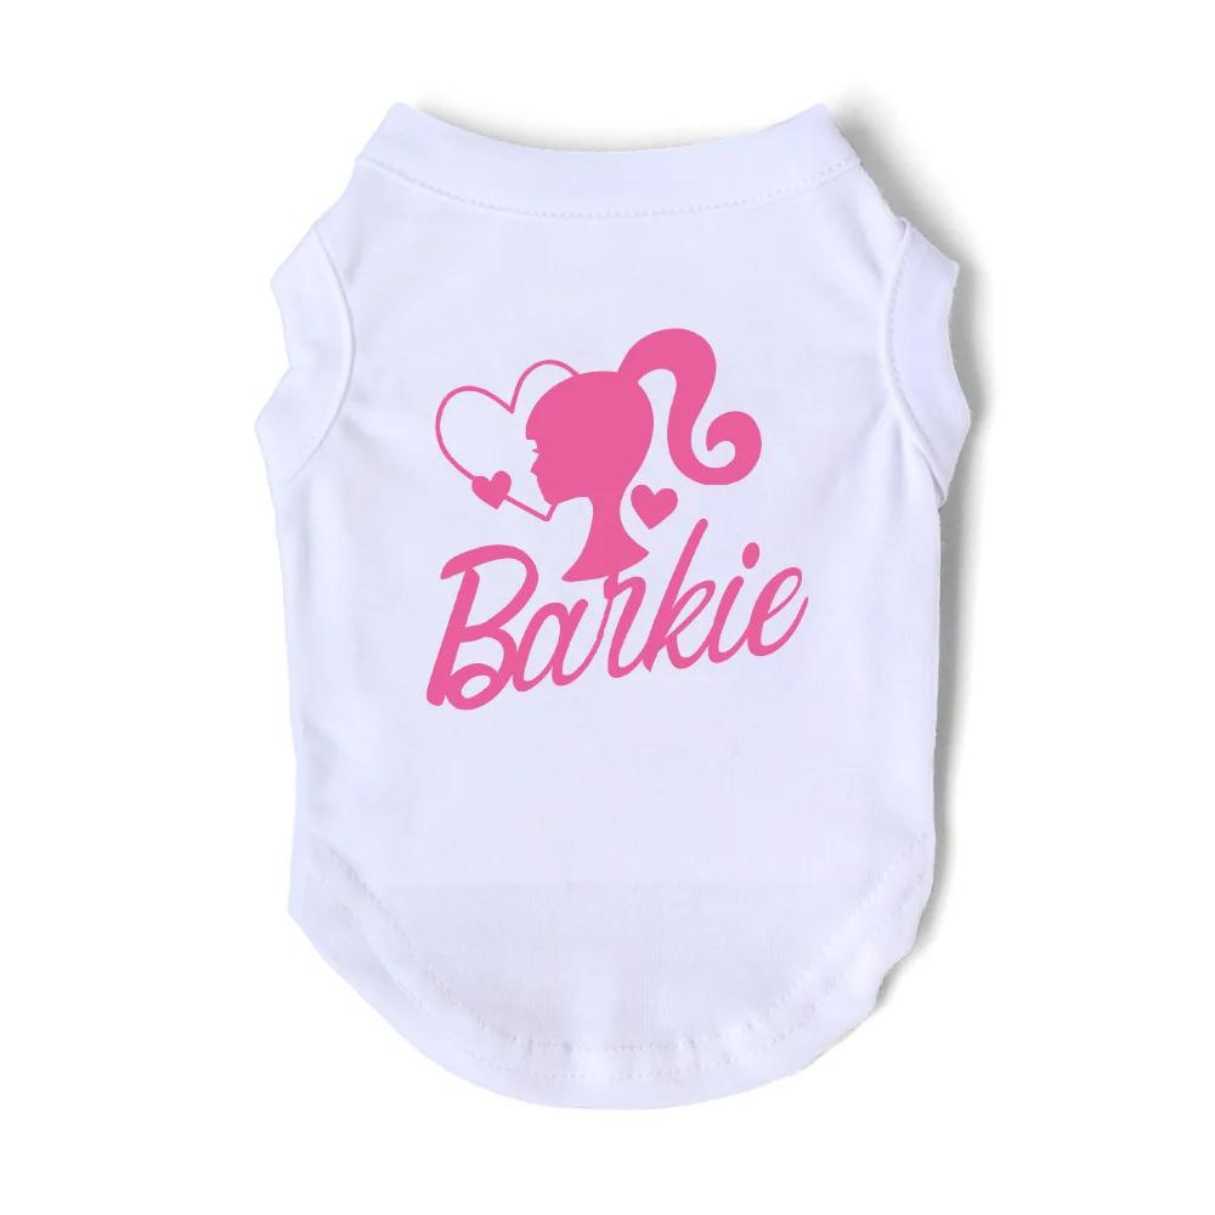 Barkie white Tshirt, singlet, sleeveless, clothes with pink text and a barbie on it